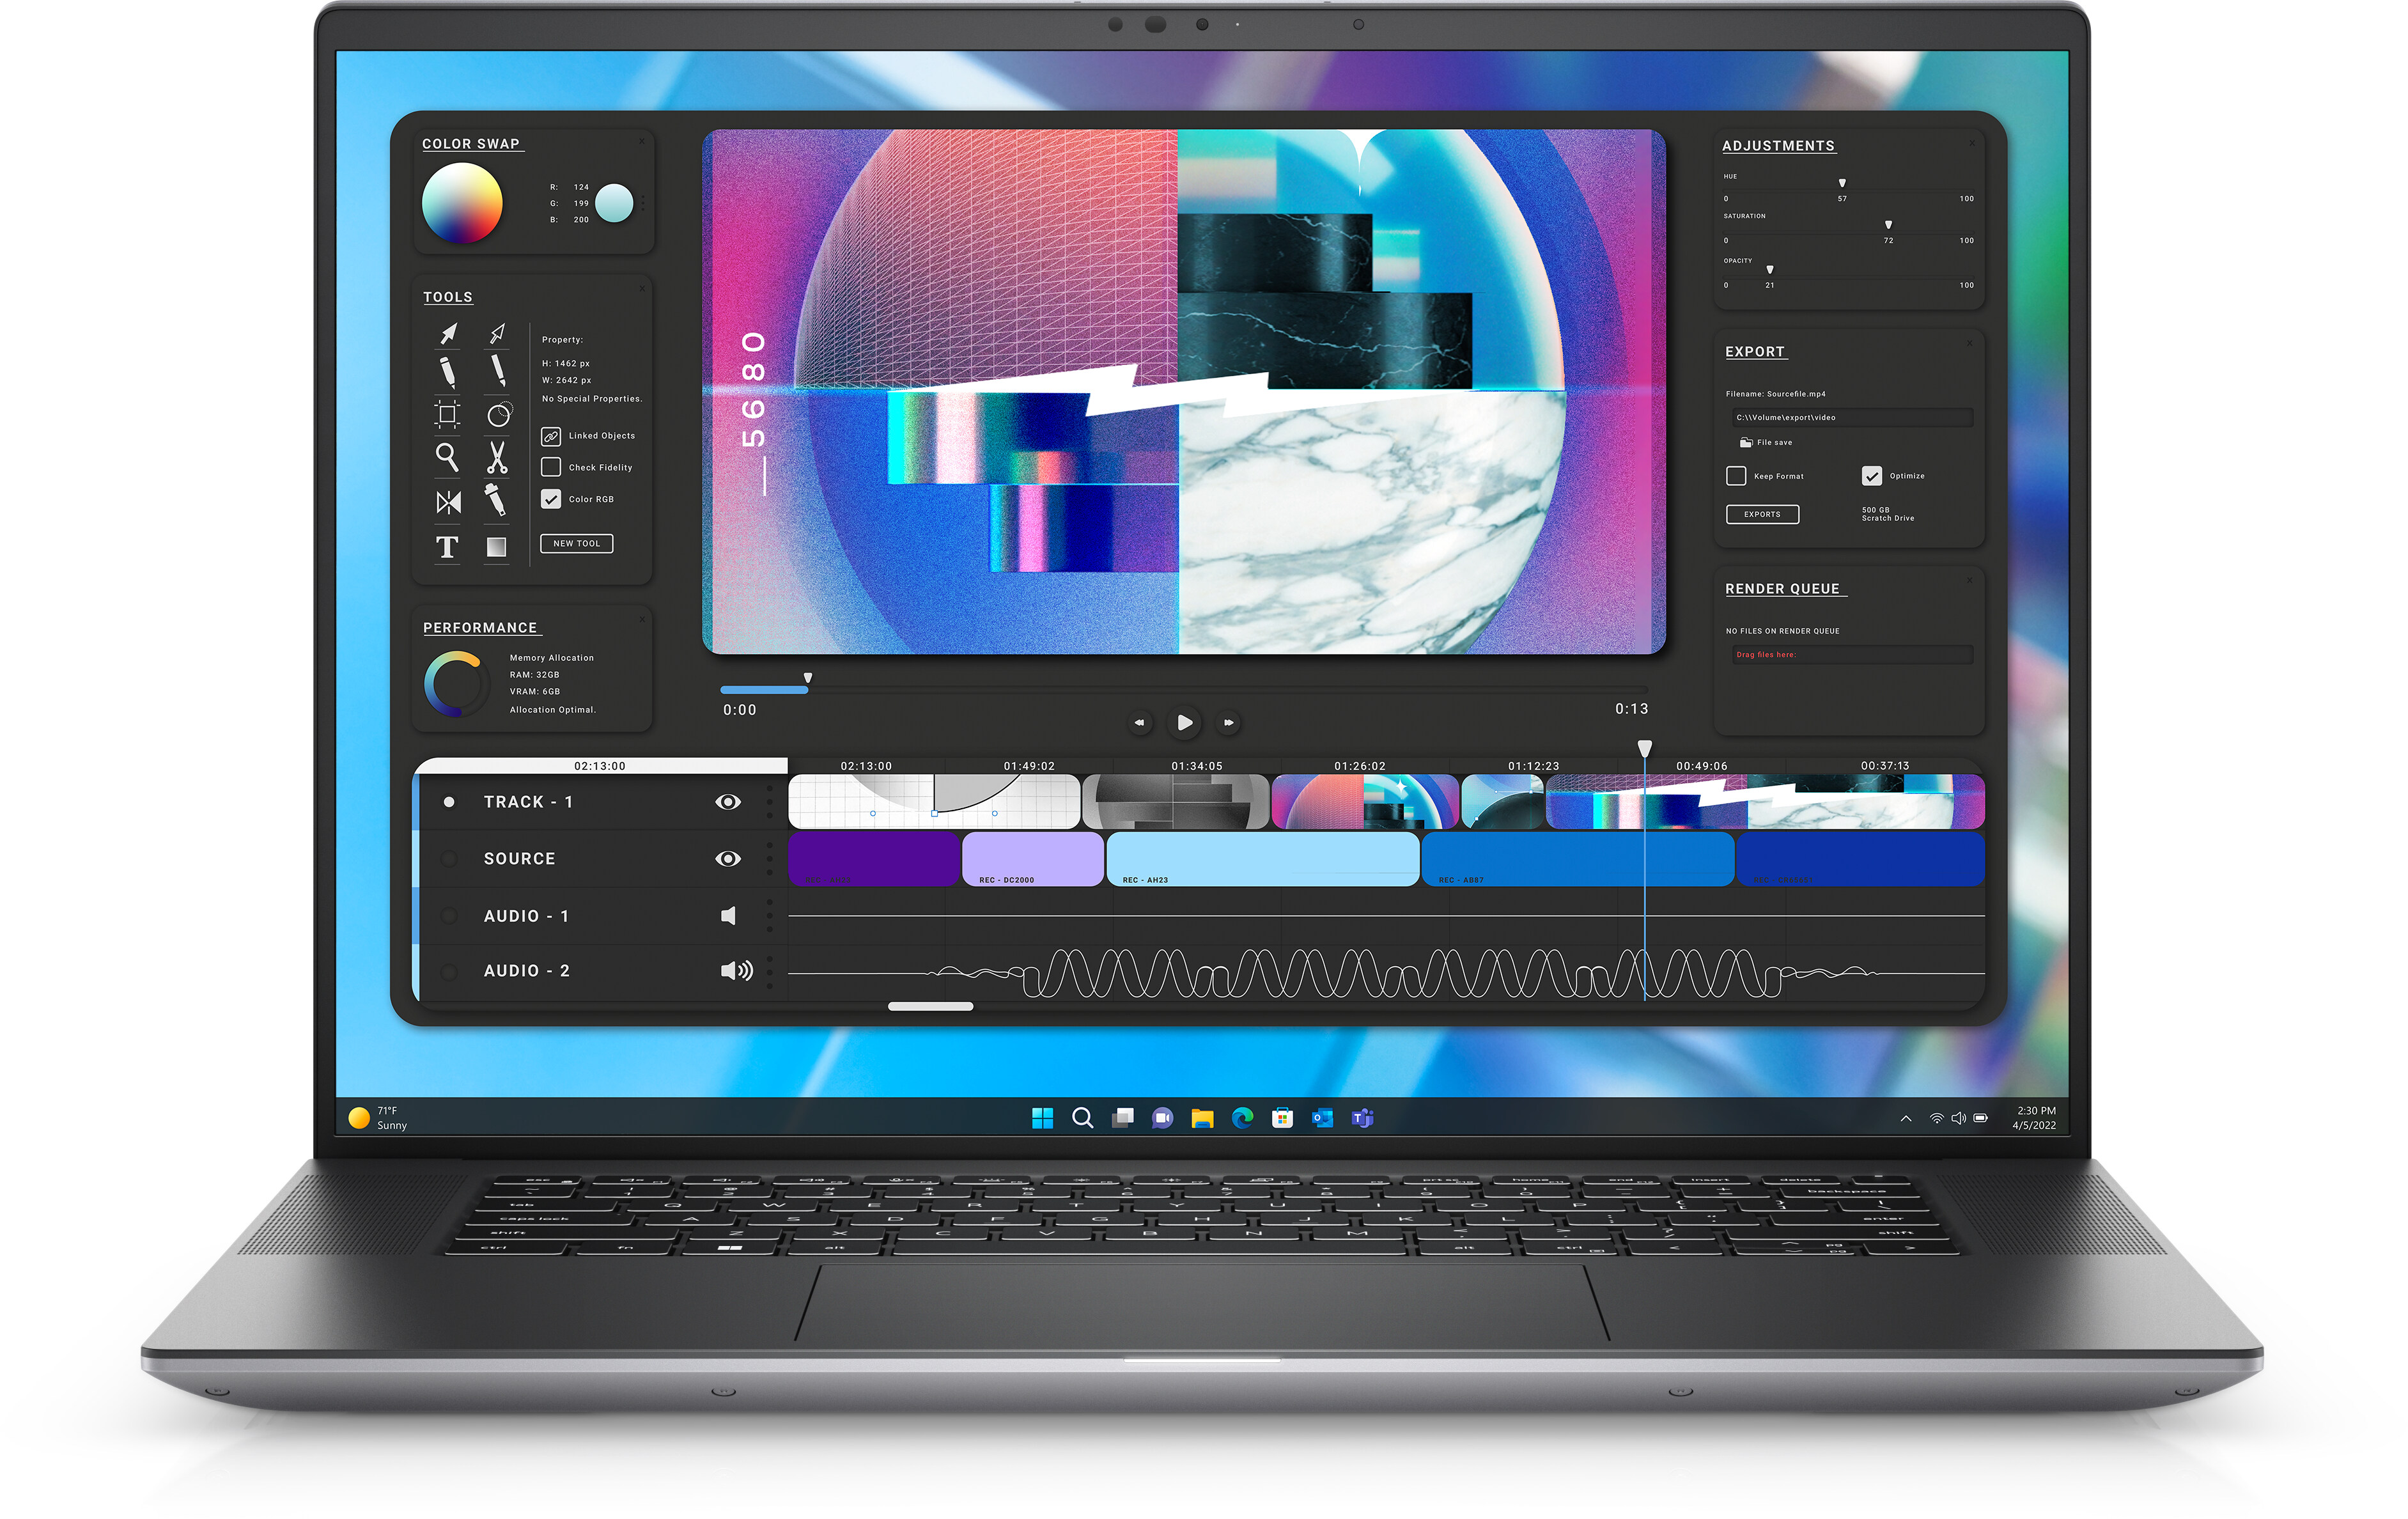 https://i.dell.com/is/image/DellContent/content/dam/ss2/product-images/dell-client-products/workstations/mobile-workstations/precision/16-5680/media-gallery/black/workstation-notebook-precision-16-5680-nt-black-gallery-2.psd?fmt=pjpg&pscan=auto&scl=1&wid=3767&hei=2376&qlt=100,1&resMode=sharp2&size=3767,2376&chrss=full&imwidth=5000